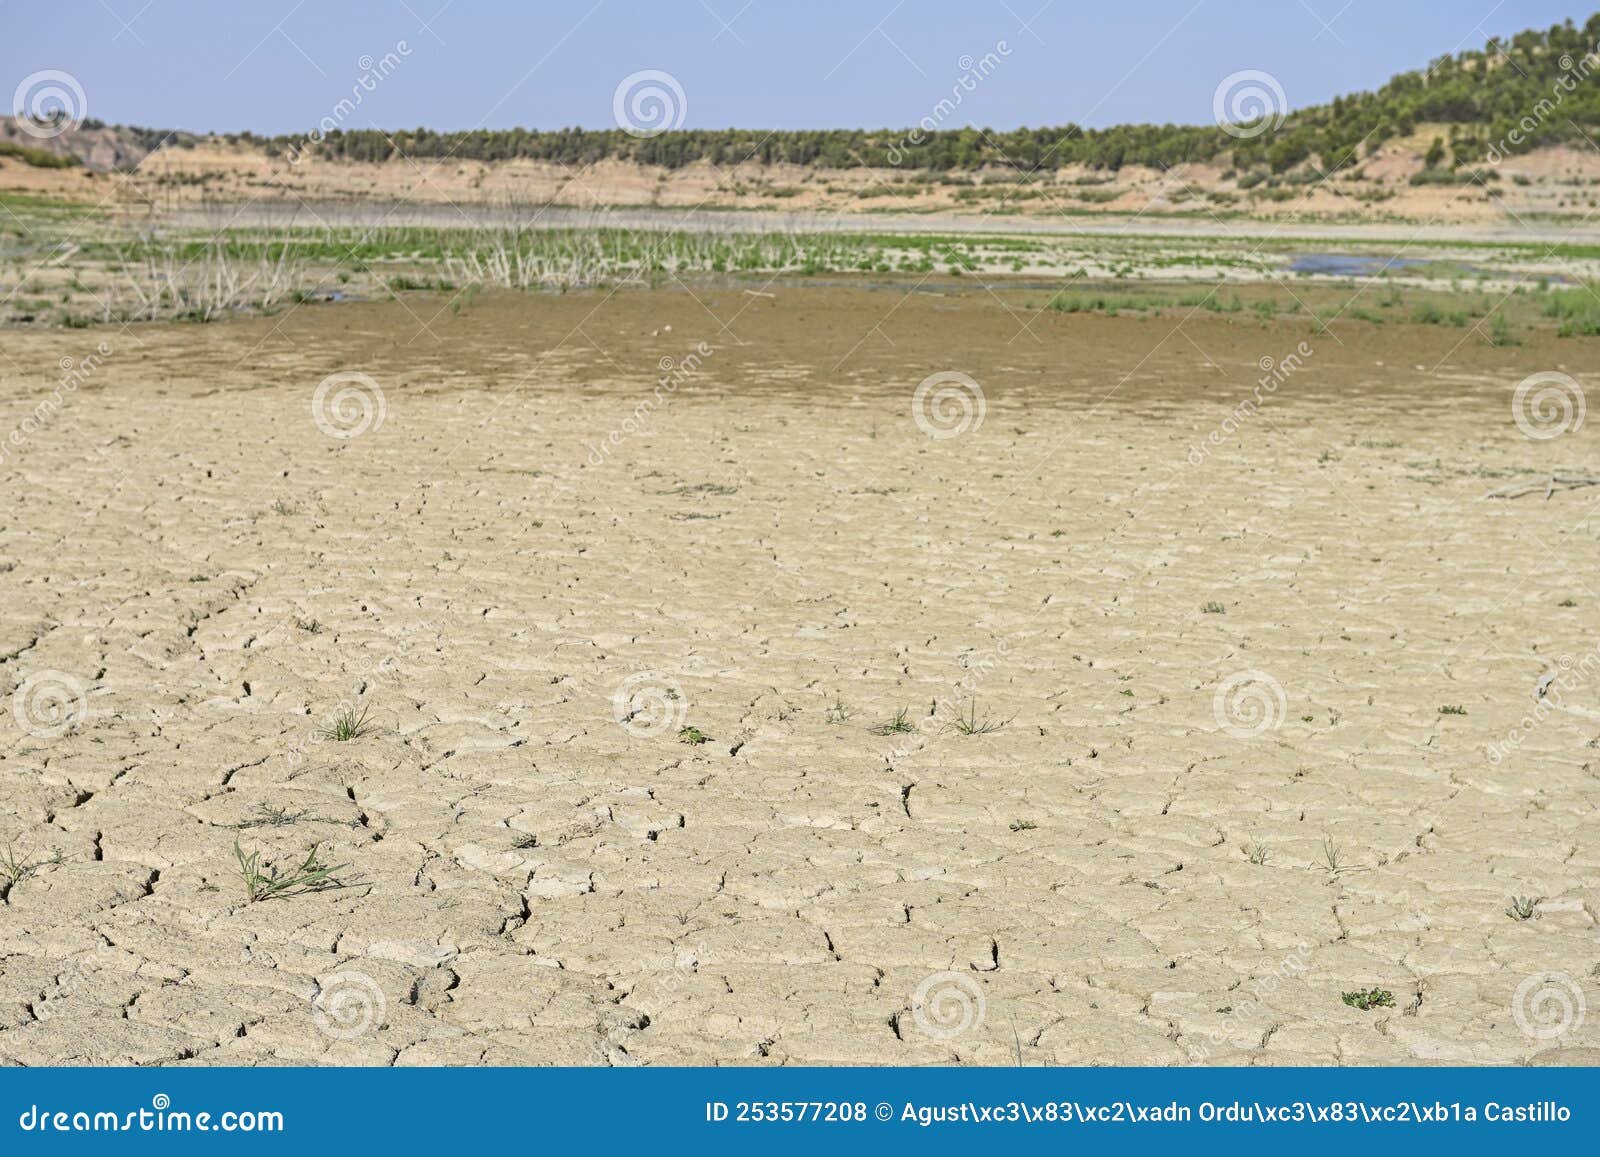 texture of dry land in southern europe. global warming and greenhouse effect